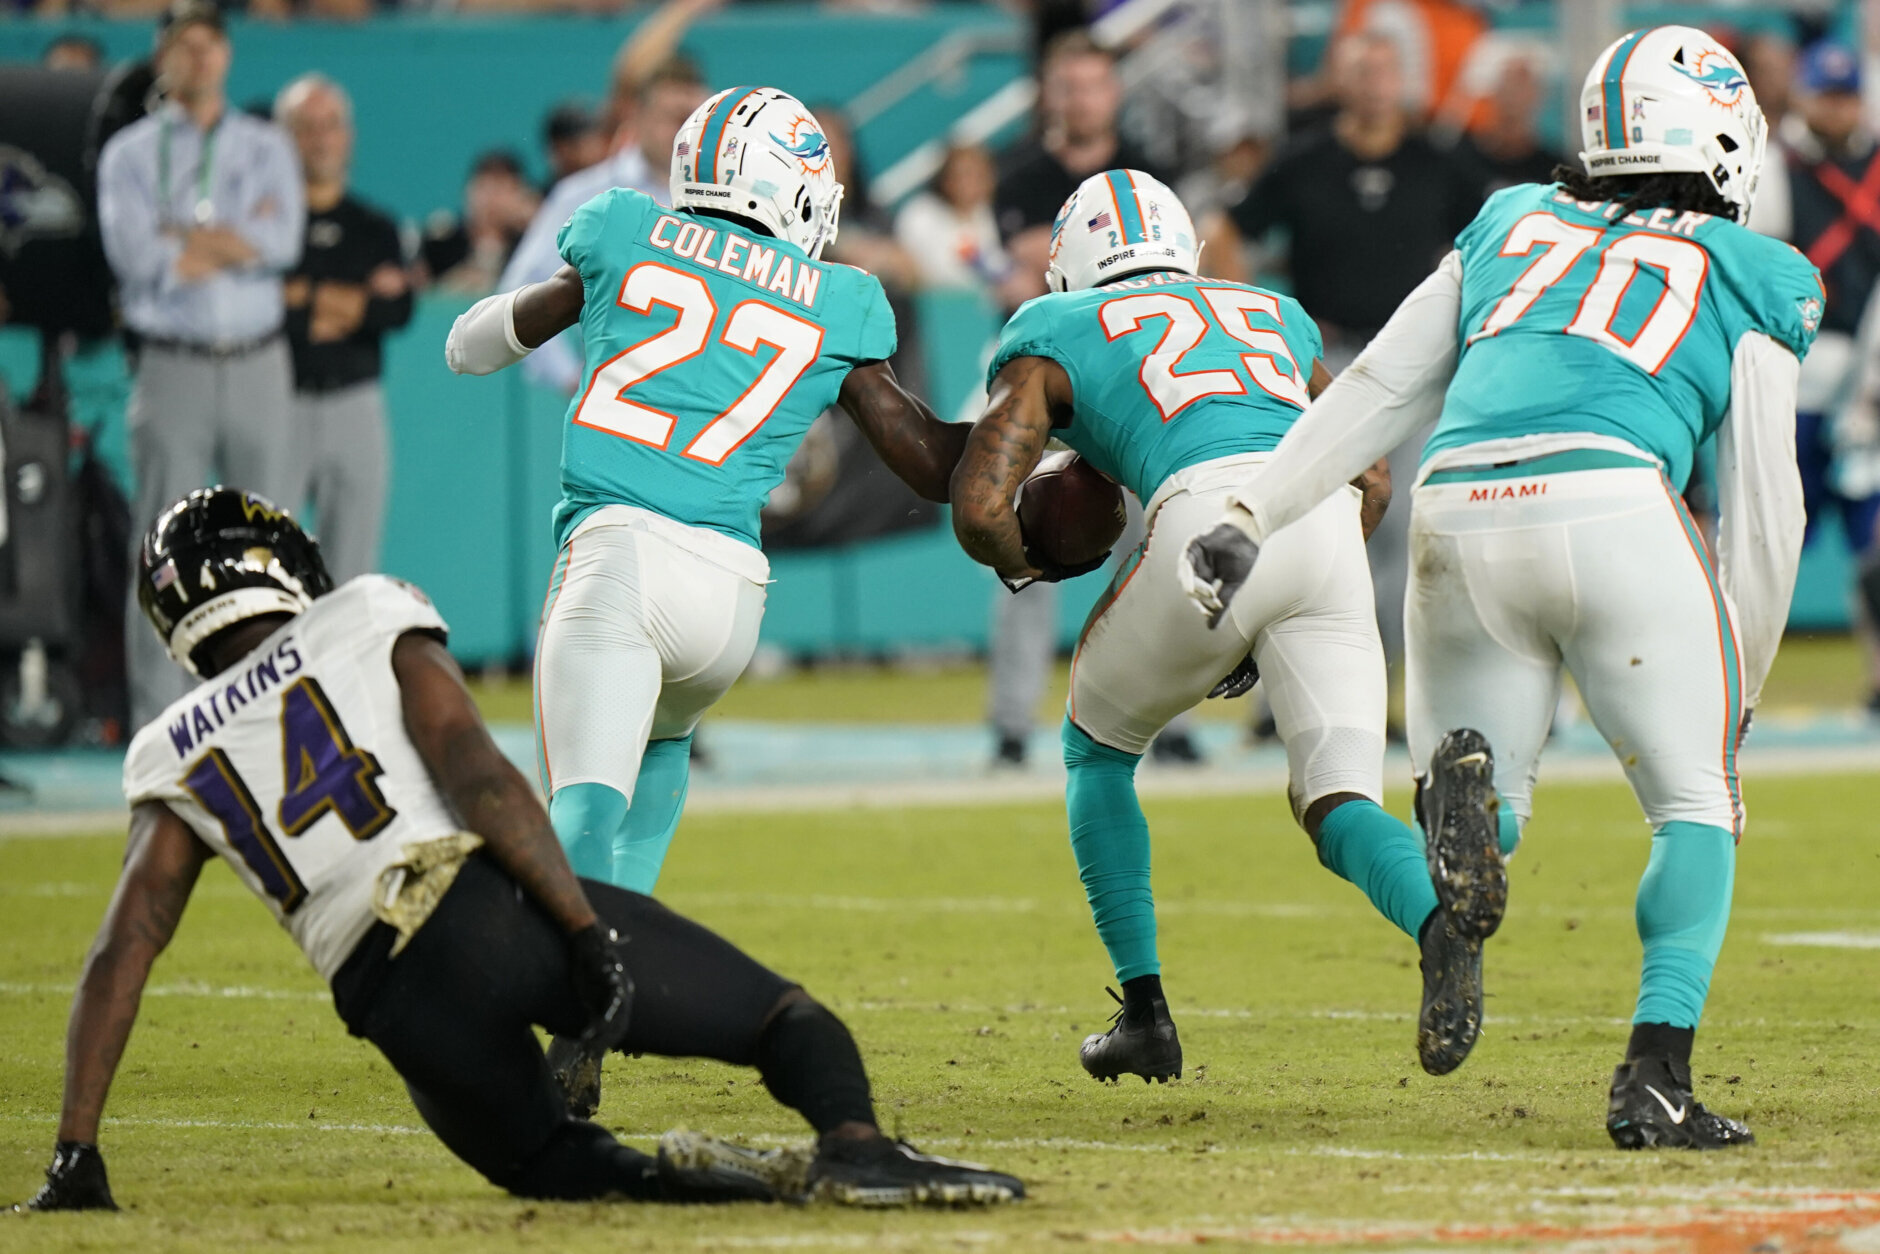 <p><b><i>Ravens 10</i></b><br />
<b><i>Dolphins 22</i></b></p>
<p>Baltimore had not only beaten Miami in eight of the last nine meetings — the Ravens won the last three meetings 137-16. Lamar Jackson&#8217;s streak of 45 straight starts scoring at least 14 points ended near his hometown. After <a href="https://profootballtalk.nbcsports.com/2021/11/12/dolphins-safeties-blitzed-more-than-any-defensive-backs-since-2015/">Miami&#8217;s merciless blitzing</a>, the Ravens have to hope their season doesn&#8217;t come down to this surprising no-show.</p>
